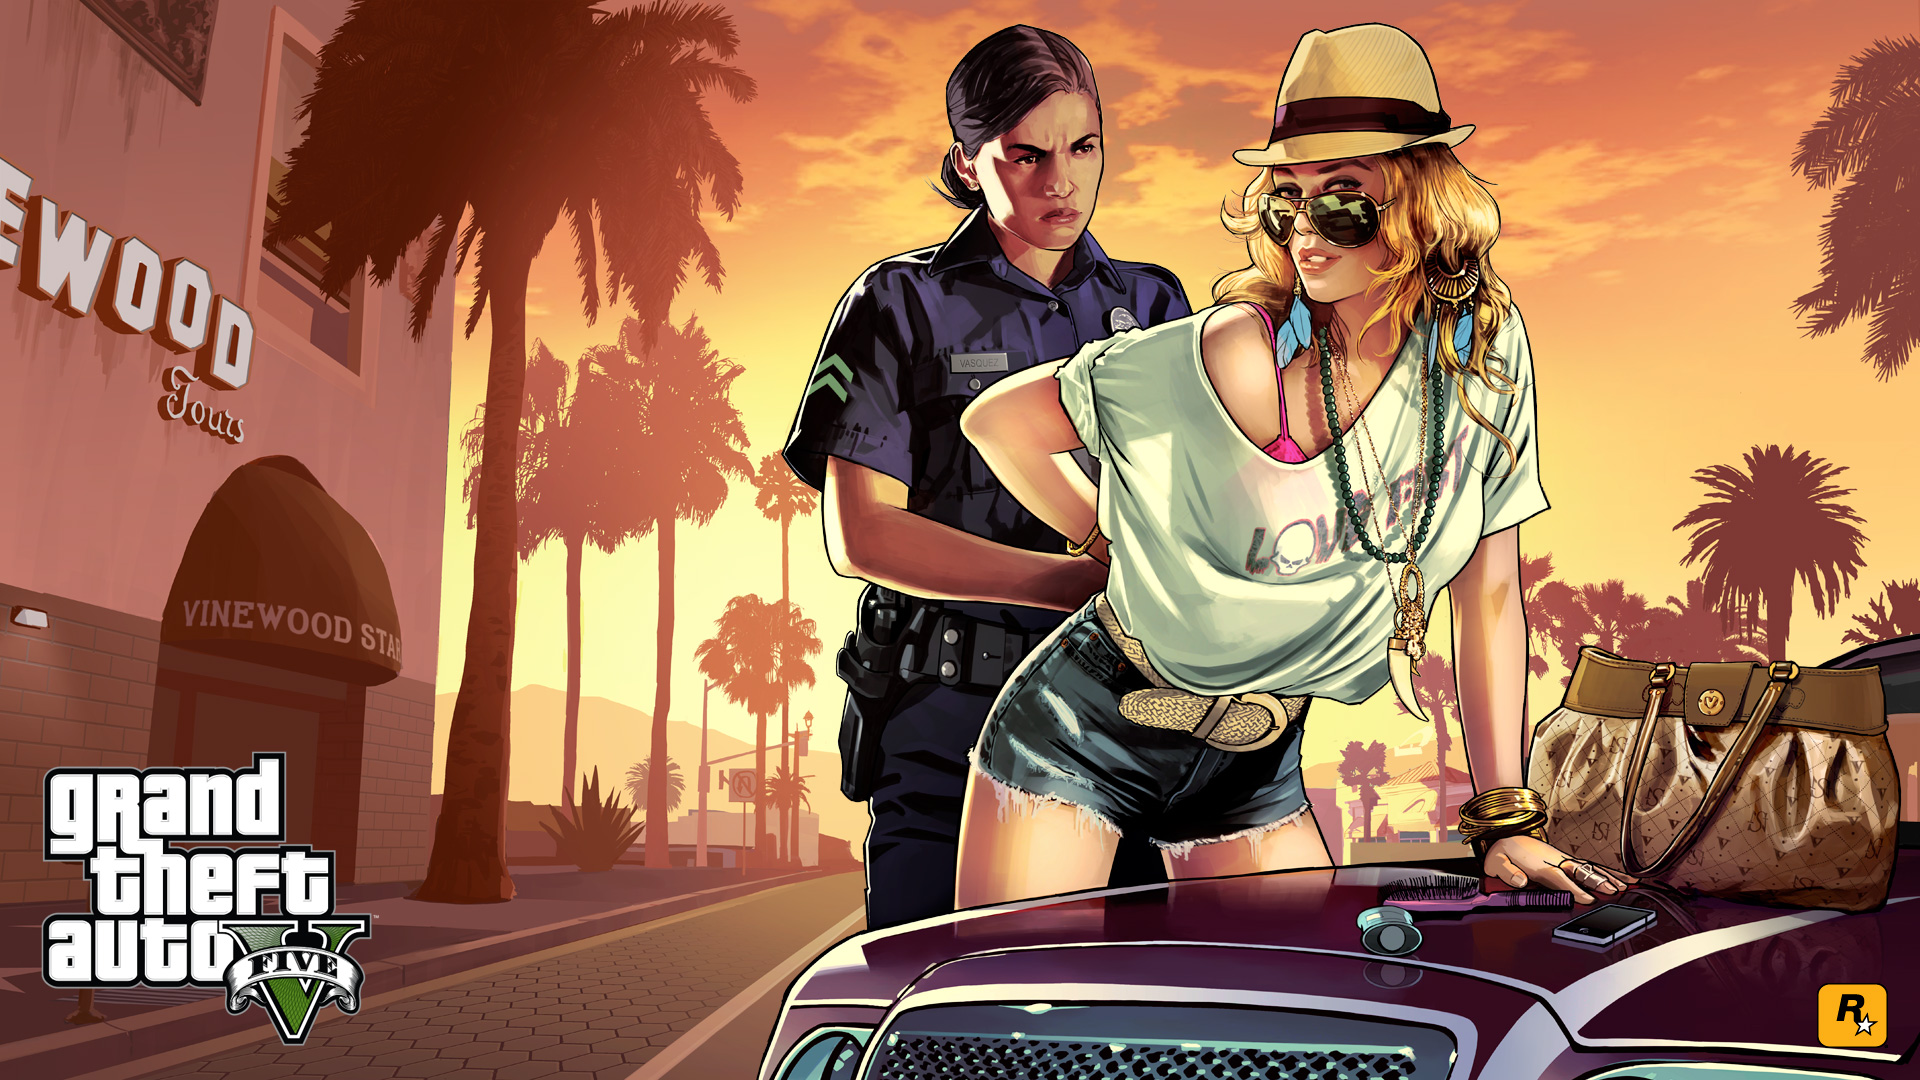 Piece Of Promotional Art So Far Made Available For Grand Theft Auto V